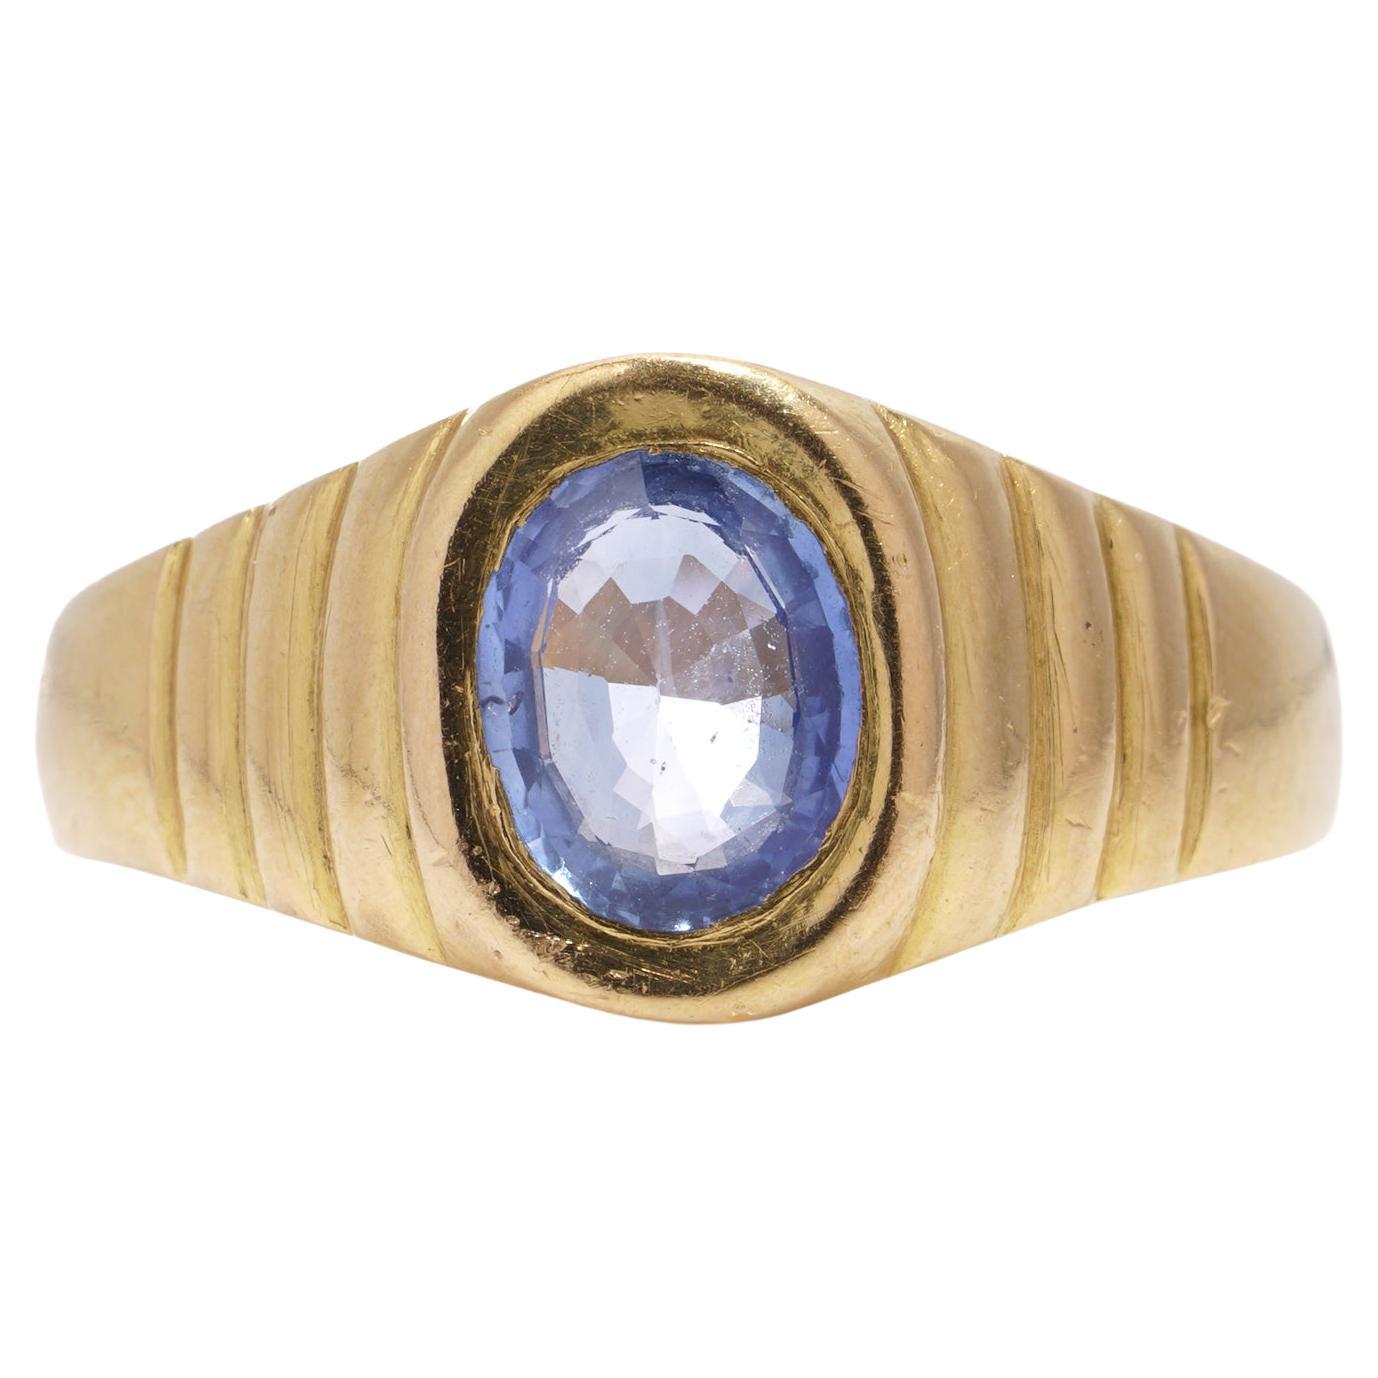 22KT.  yellow gold men's 0.75 cts of blue sapphire ring. 
Hallmarked 916 gold mark, KDM, 2RS 

The dimensions - 
Finger Size (UK) = T (EU) = 61 (US) = 10 
Weight: 5.00 grams

Condition: Pre-owned, minor signs of usage and age, excellent and pleasant